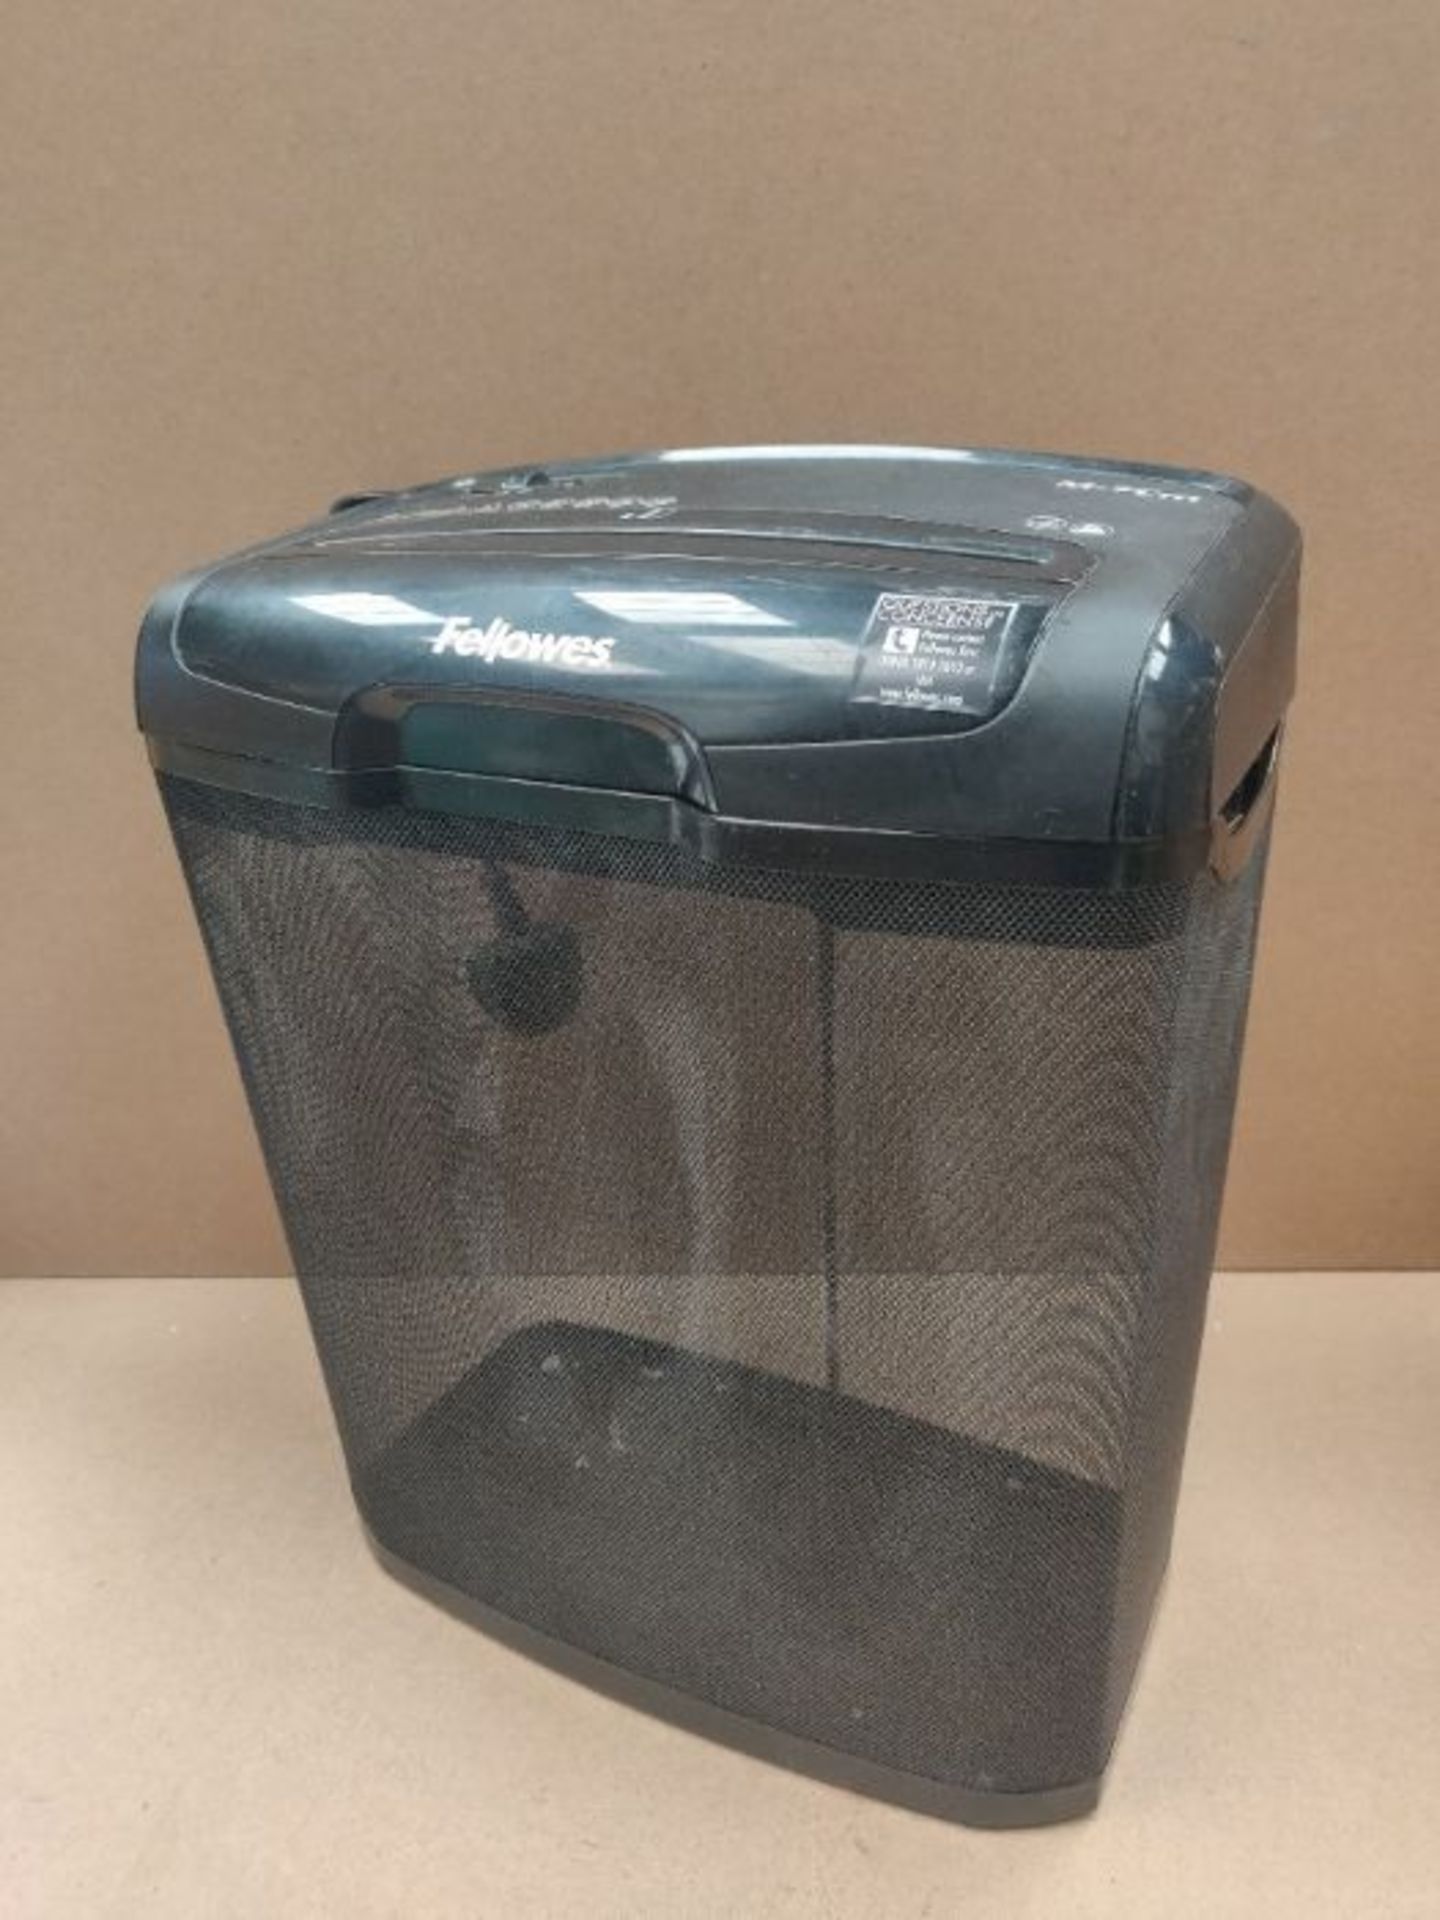 Fellowes Powershred M-7CM Personal 7 Sheet Cross Cut Paper Shredder for Home Use - Image 3 of 3